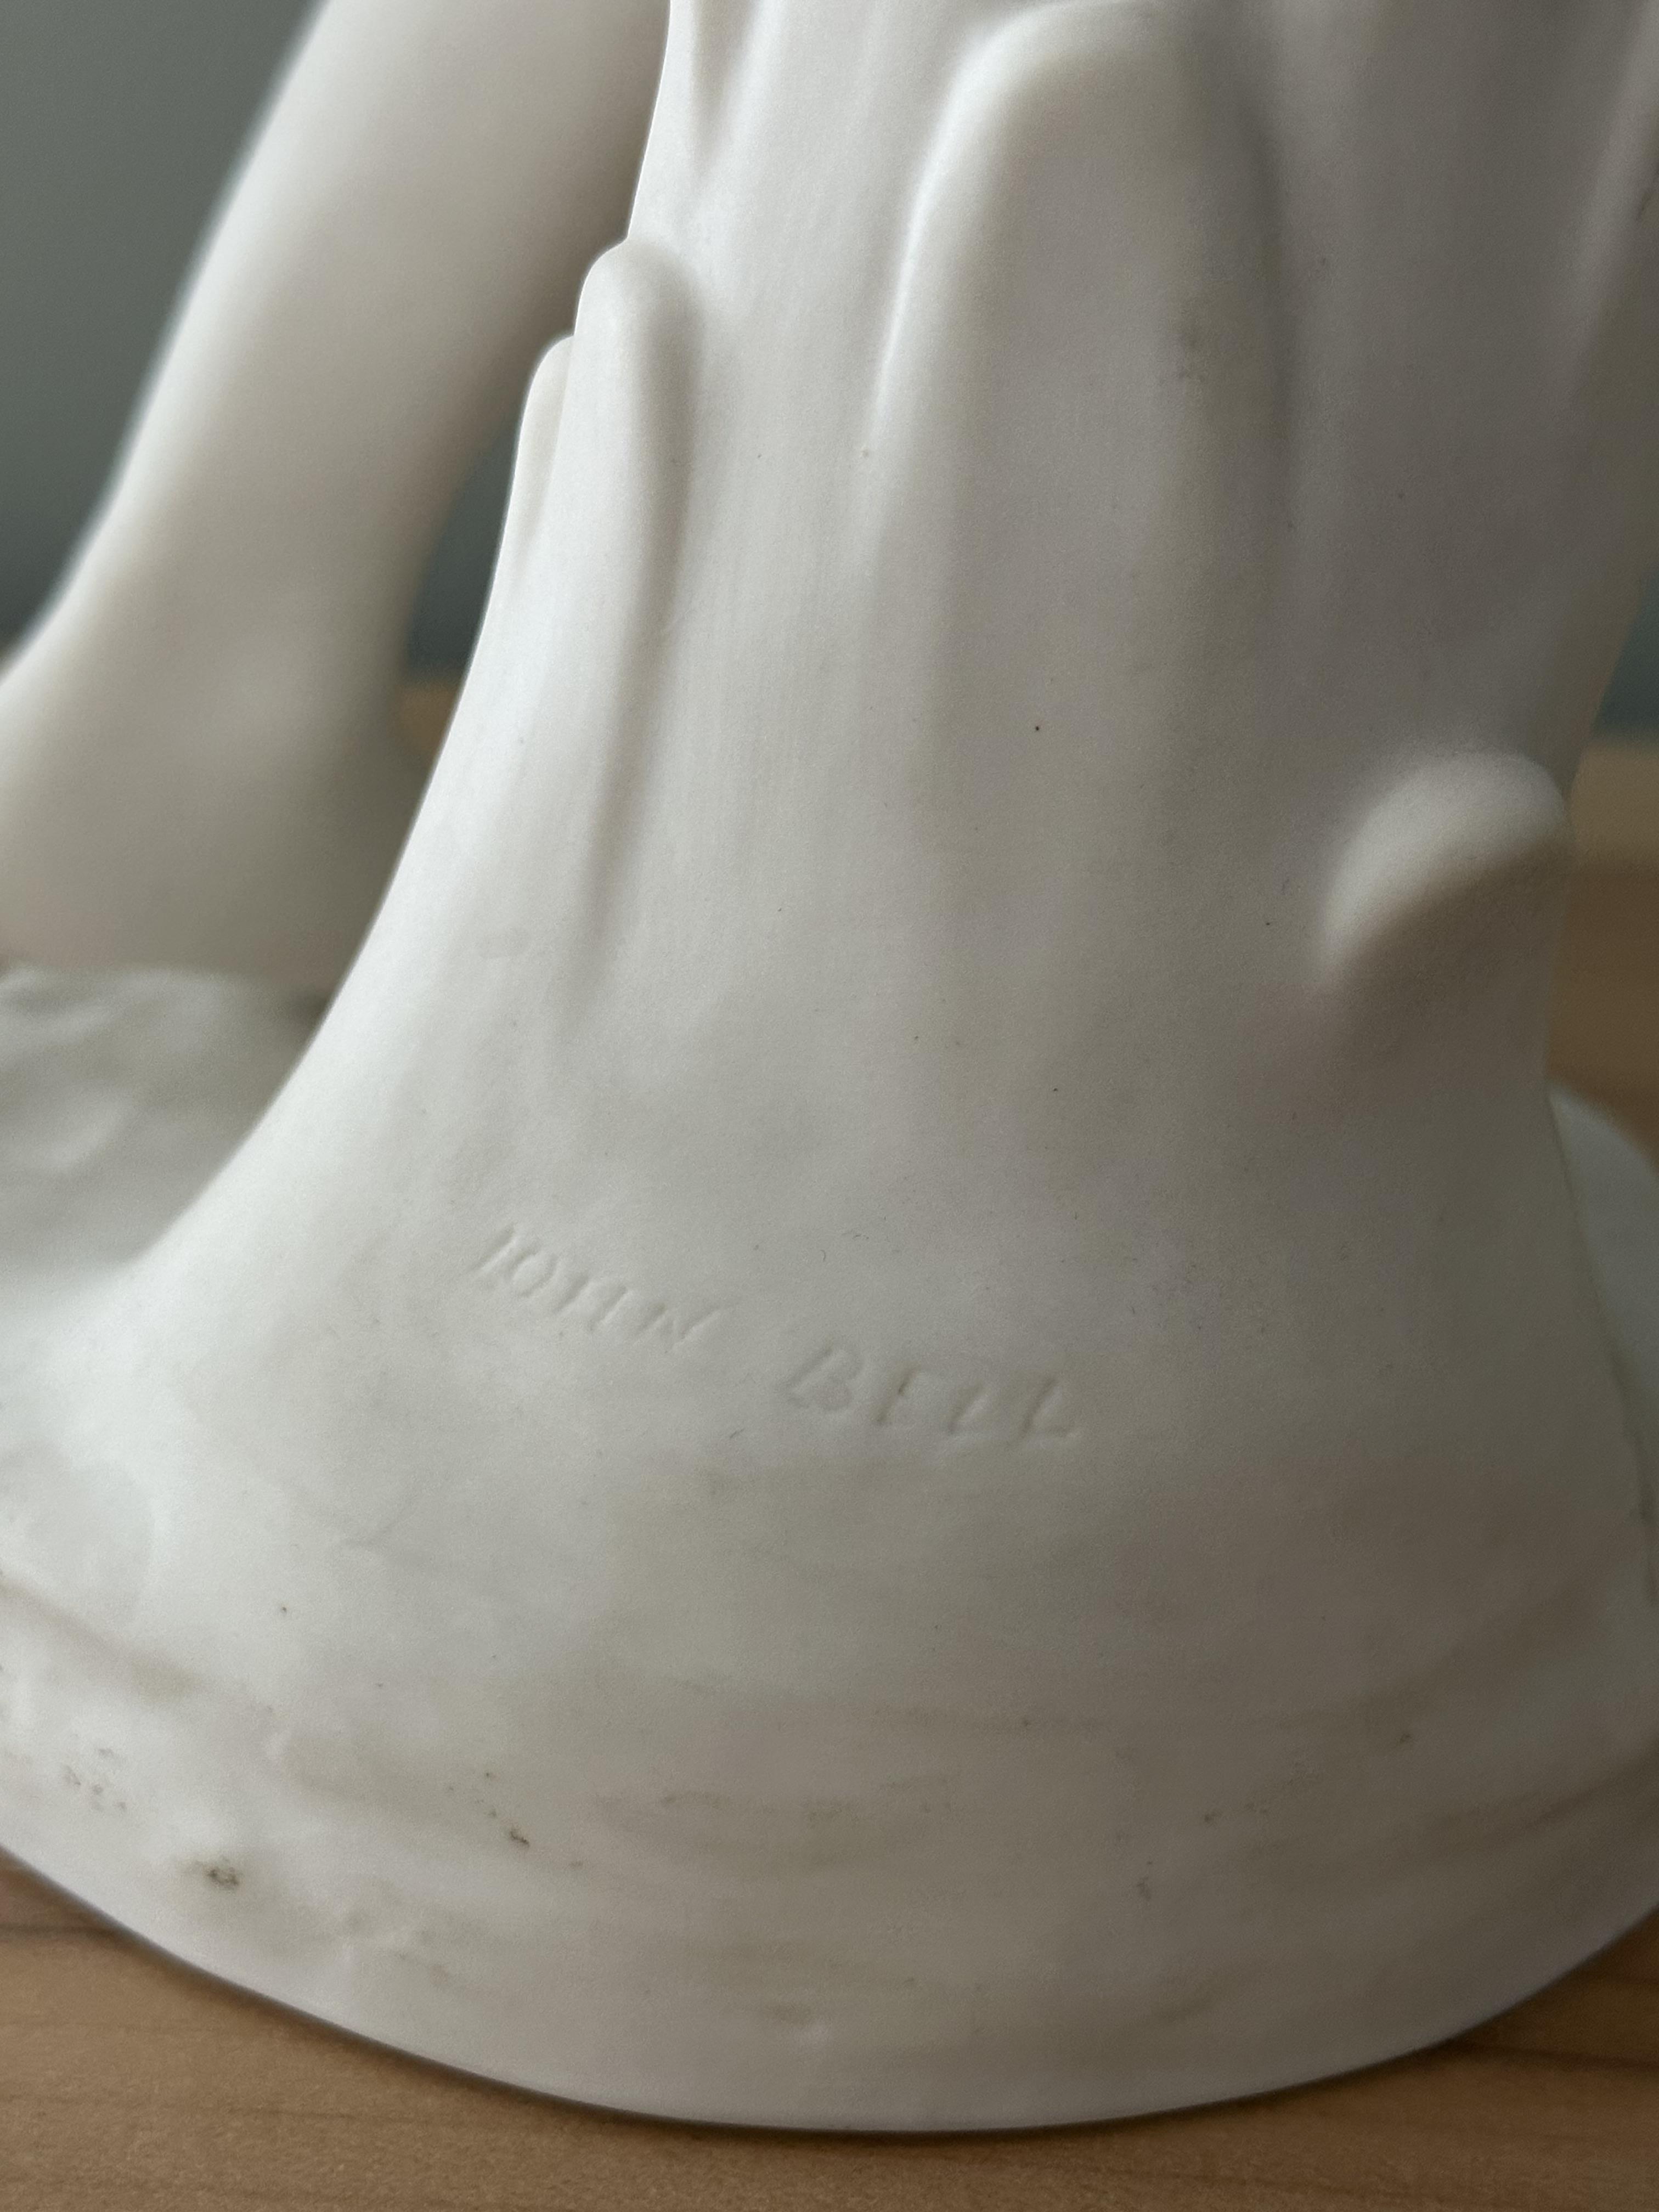 Parian Ware Minton Sculpture by John Bell. One ha - Image 12 of 16